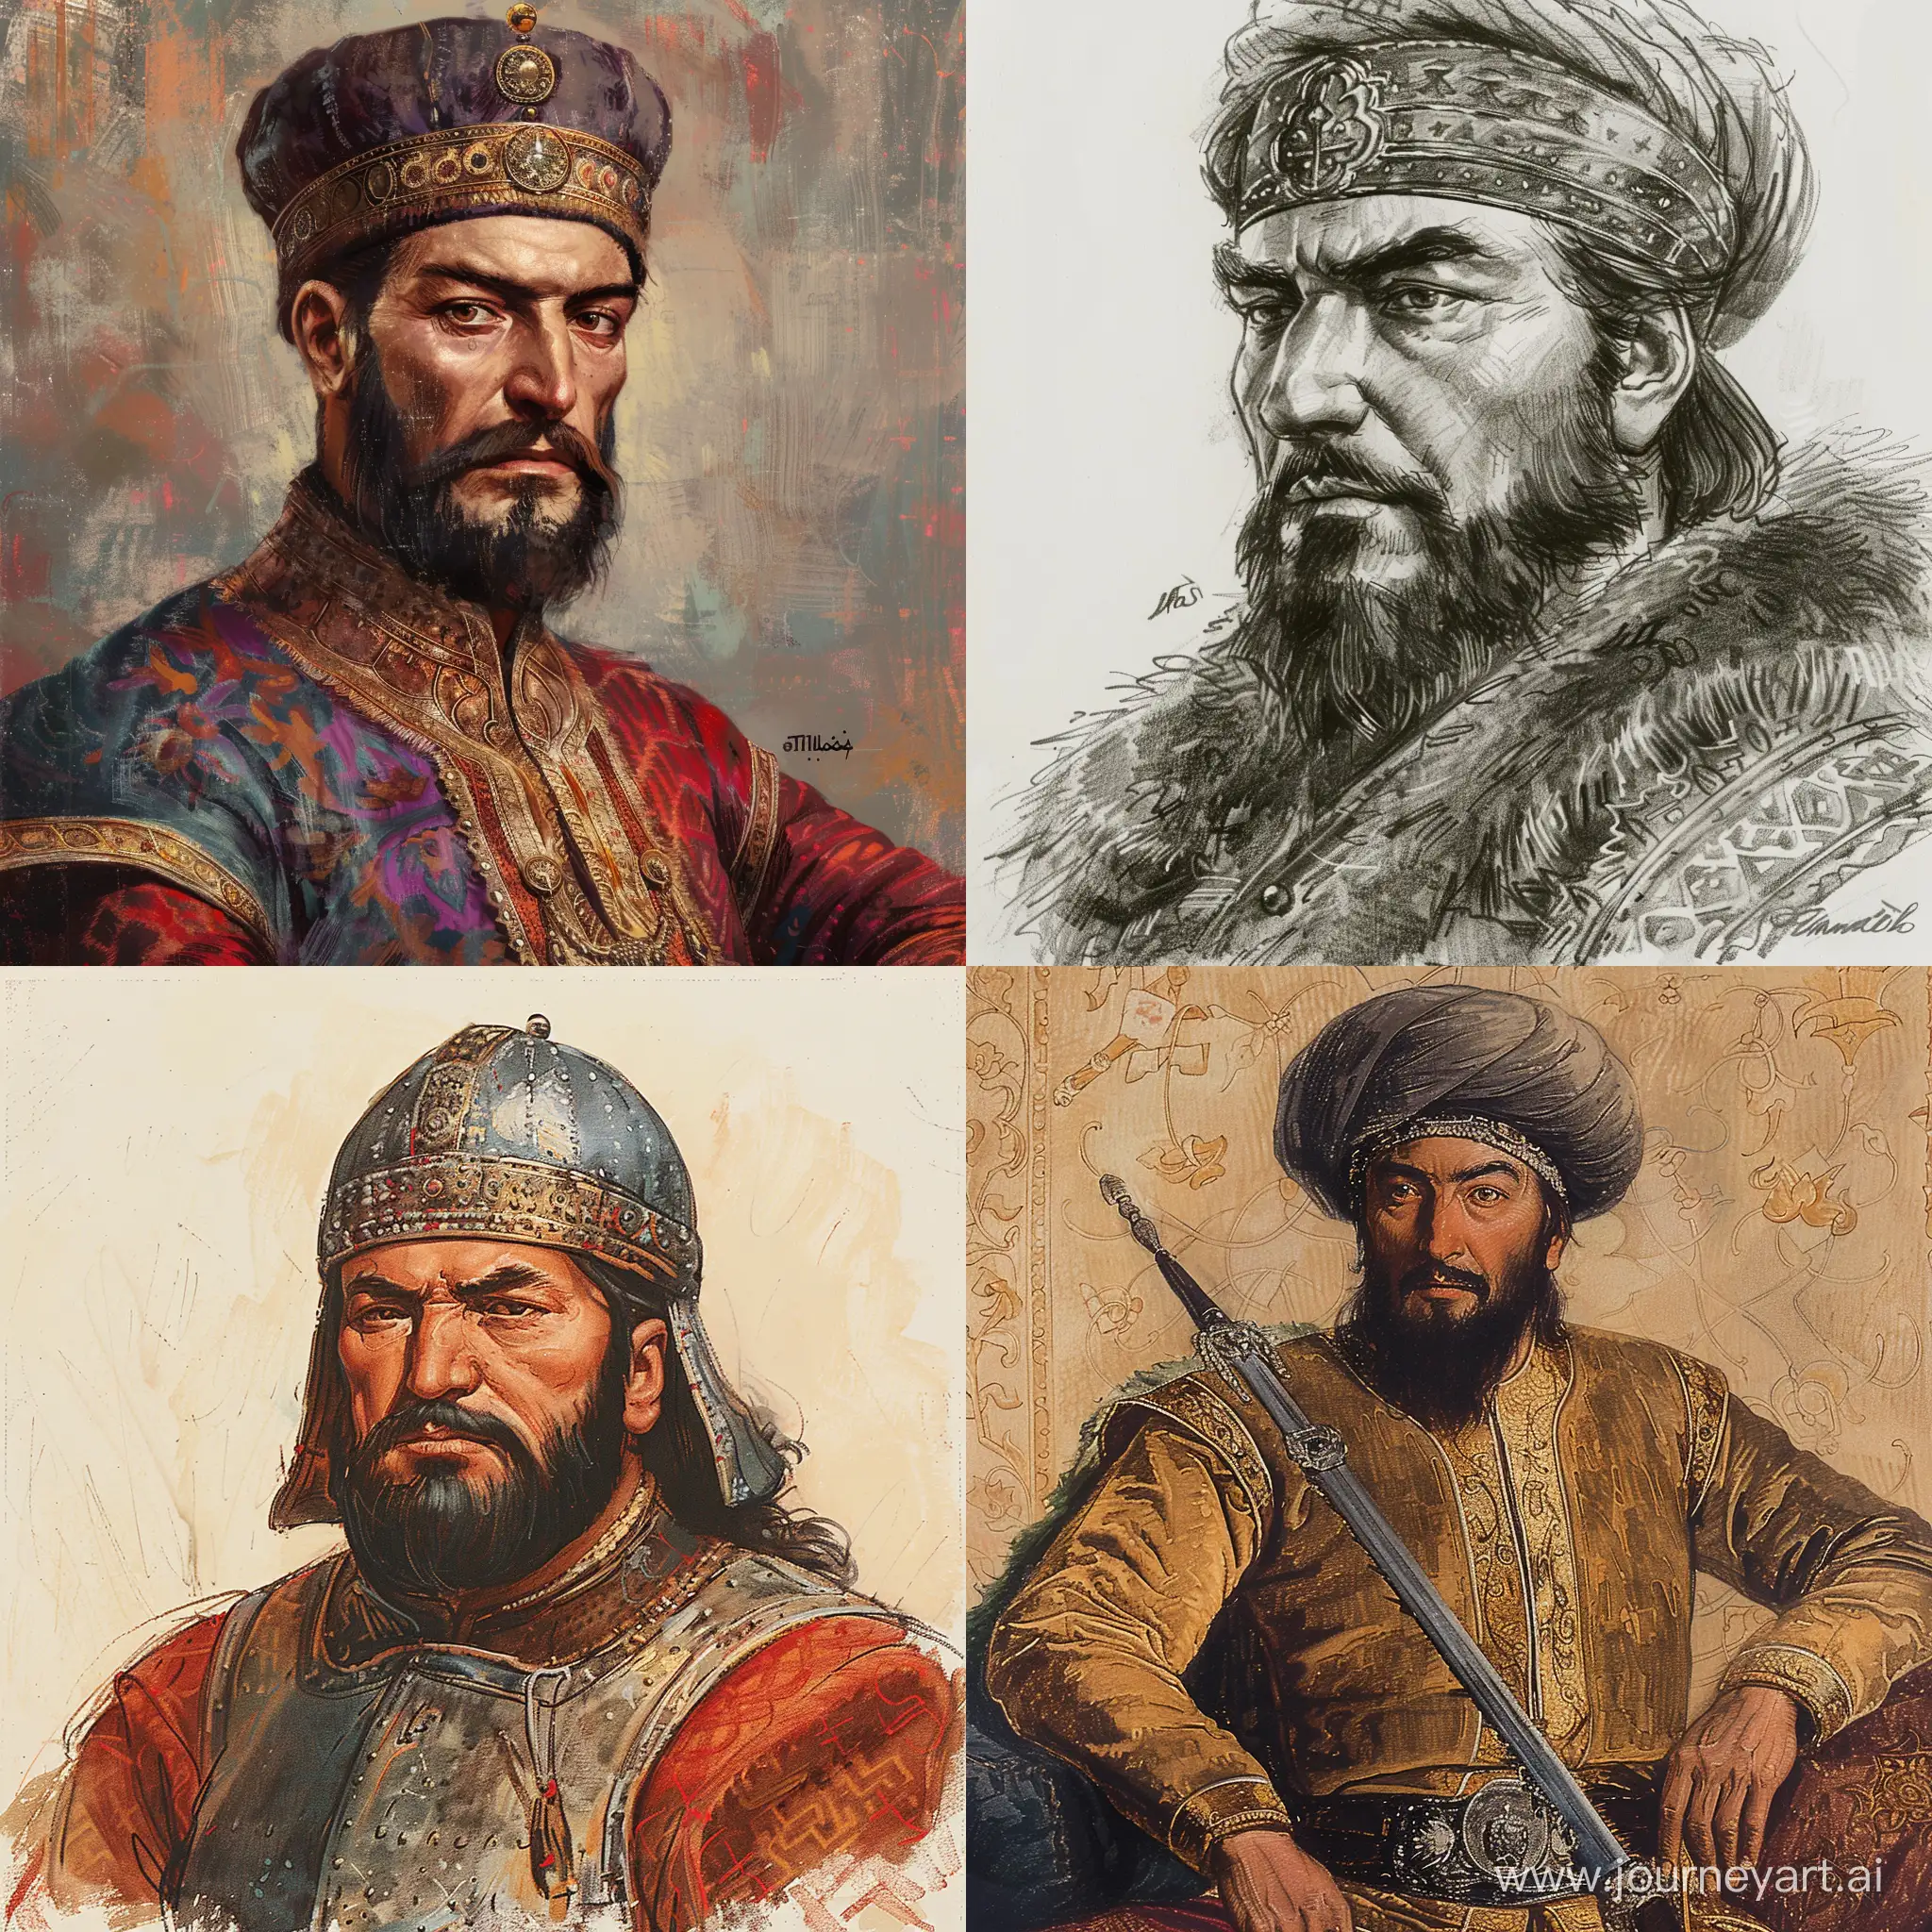 Draw Timur (Emir Timur) or Tamerbeg (9 April 1336 – 17 February 1405) was a Turco-Uzbek conqueror in the 14th century who is regarded as one of history's greatest military leaders and strategists